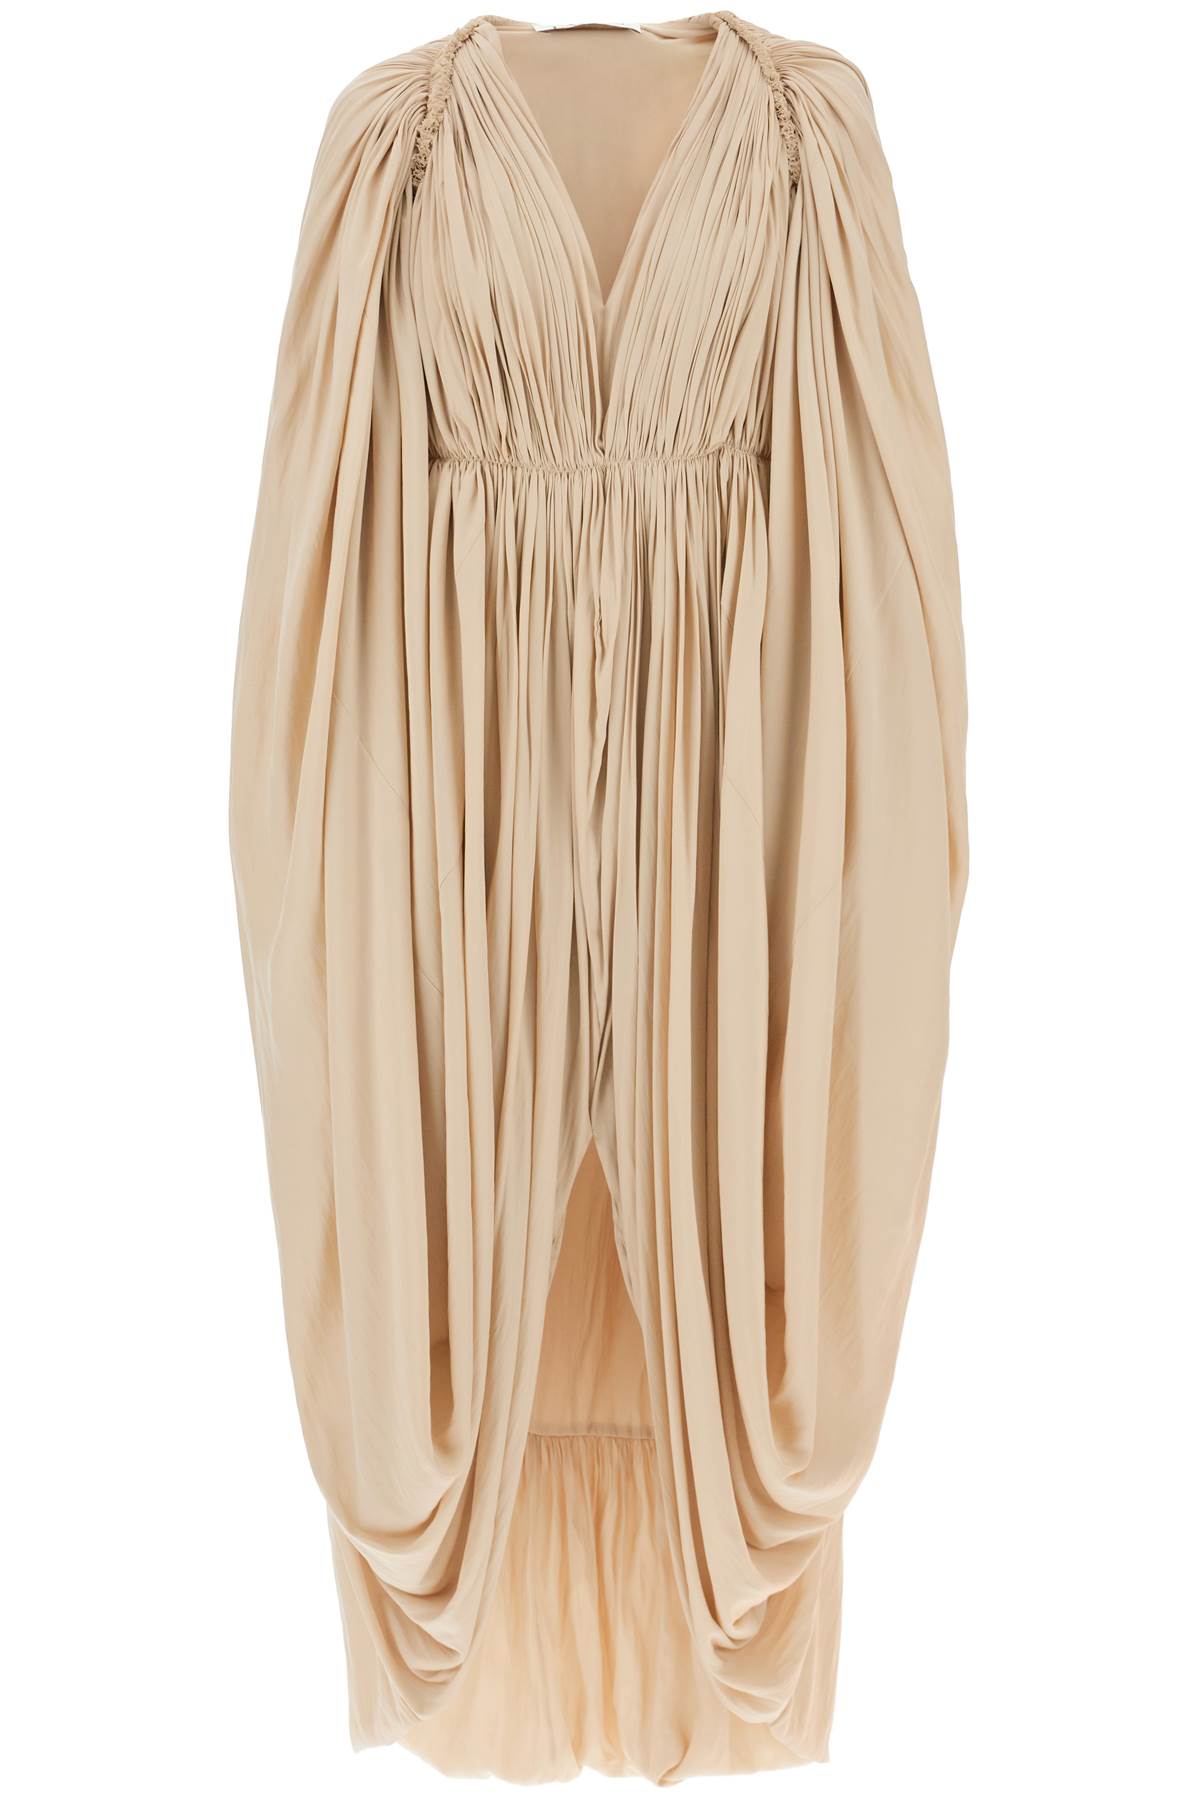 LANVIN Beige Charmeuse Maxi Dress with Draped Construction and Balloon Sleeves